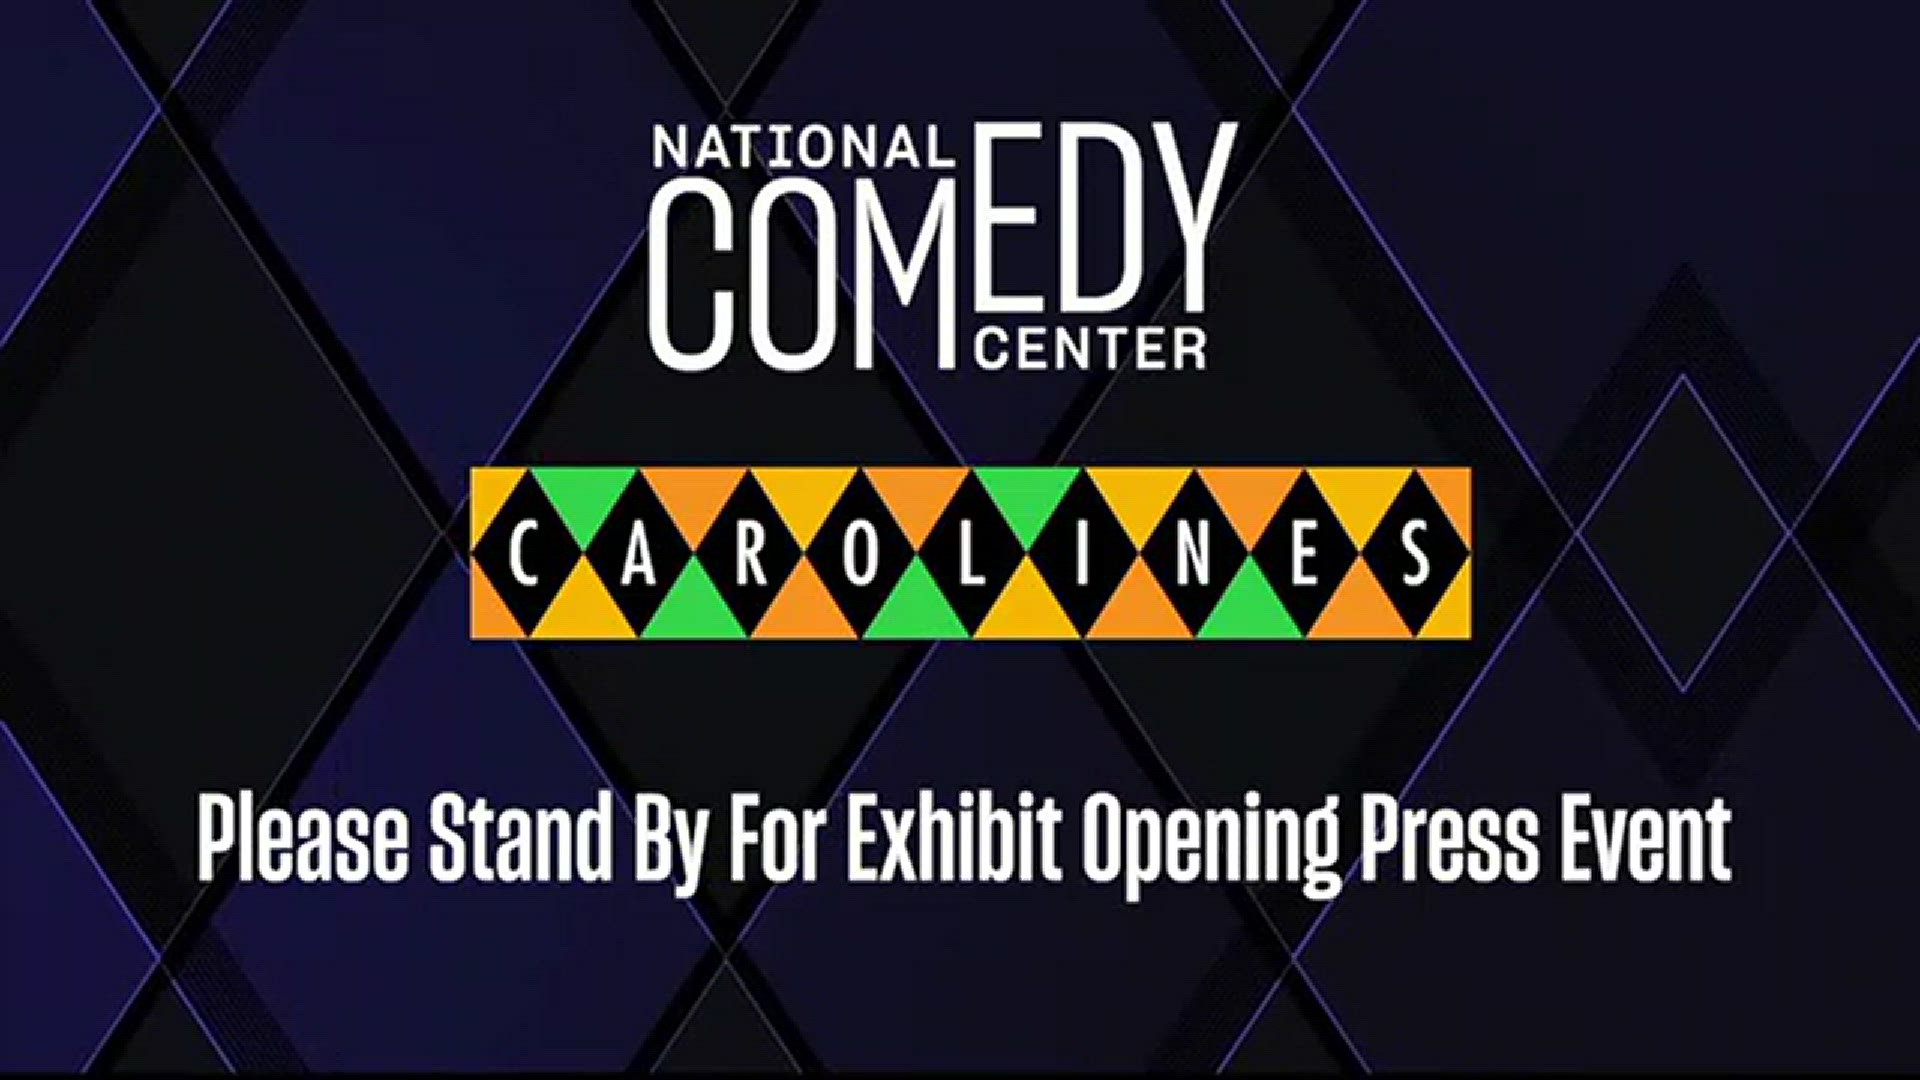 New exhibit honoring Caroline Hirsch, Carolines on Broadway opens at National Comedy Center